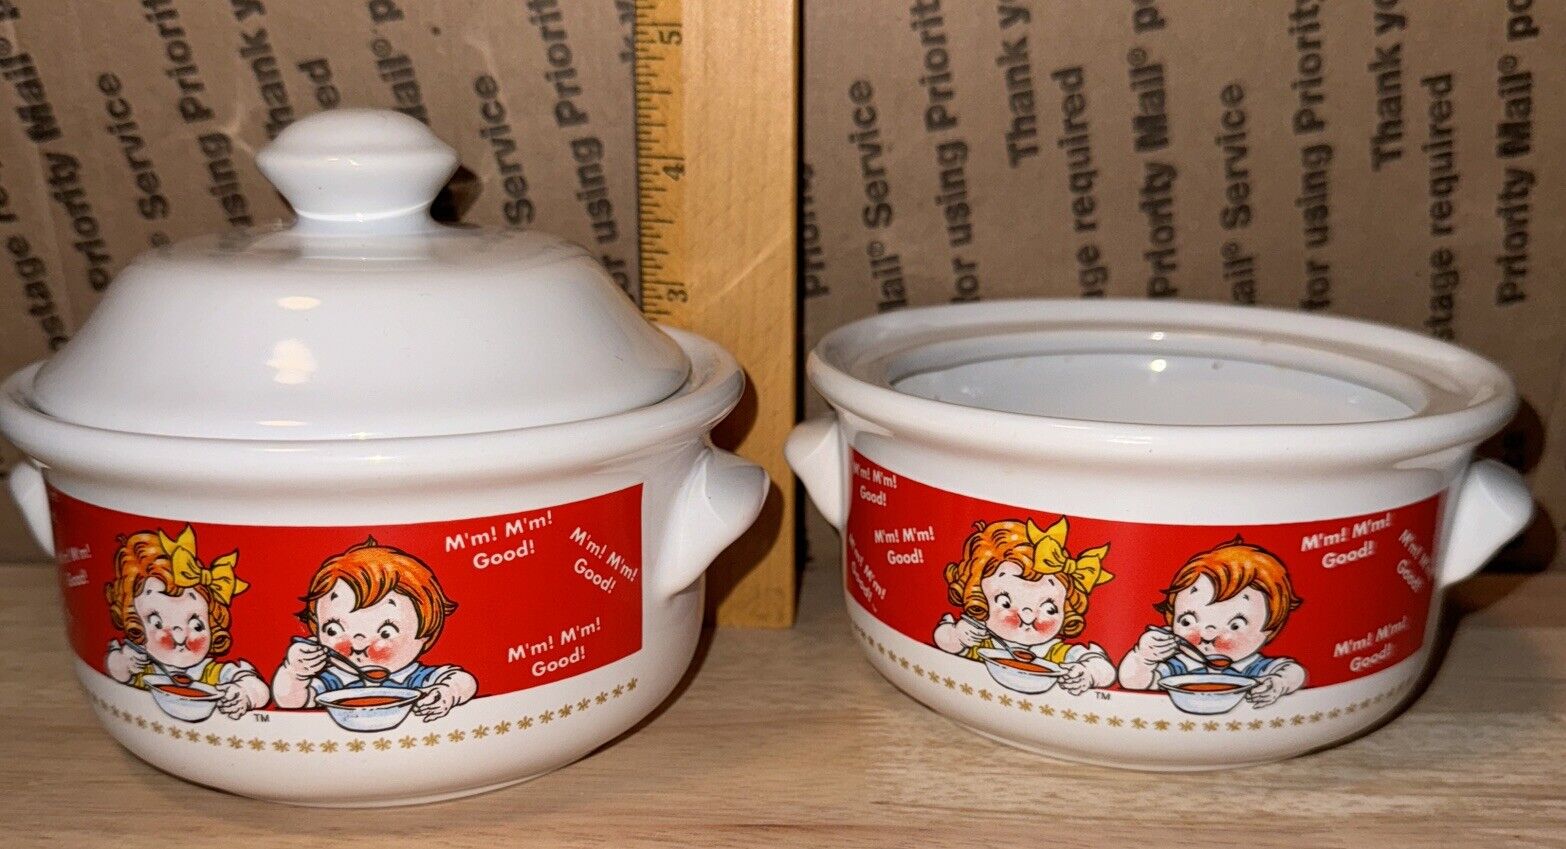 VTG Campbell's Soup Bowls 1998 w/ Handles & 1 Lid- Set Of 2 (USED)